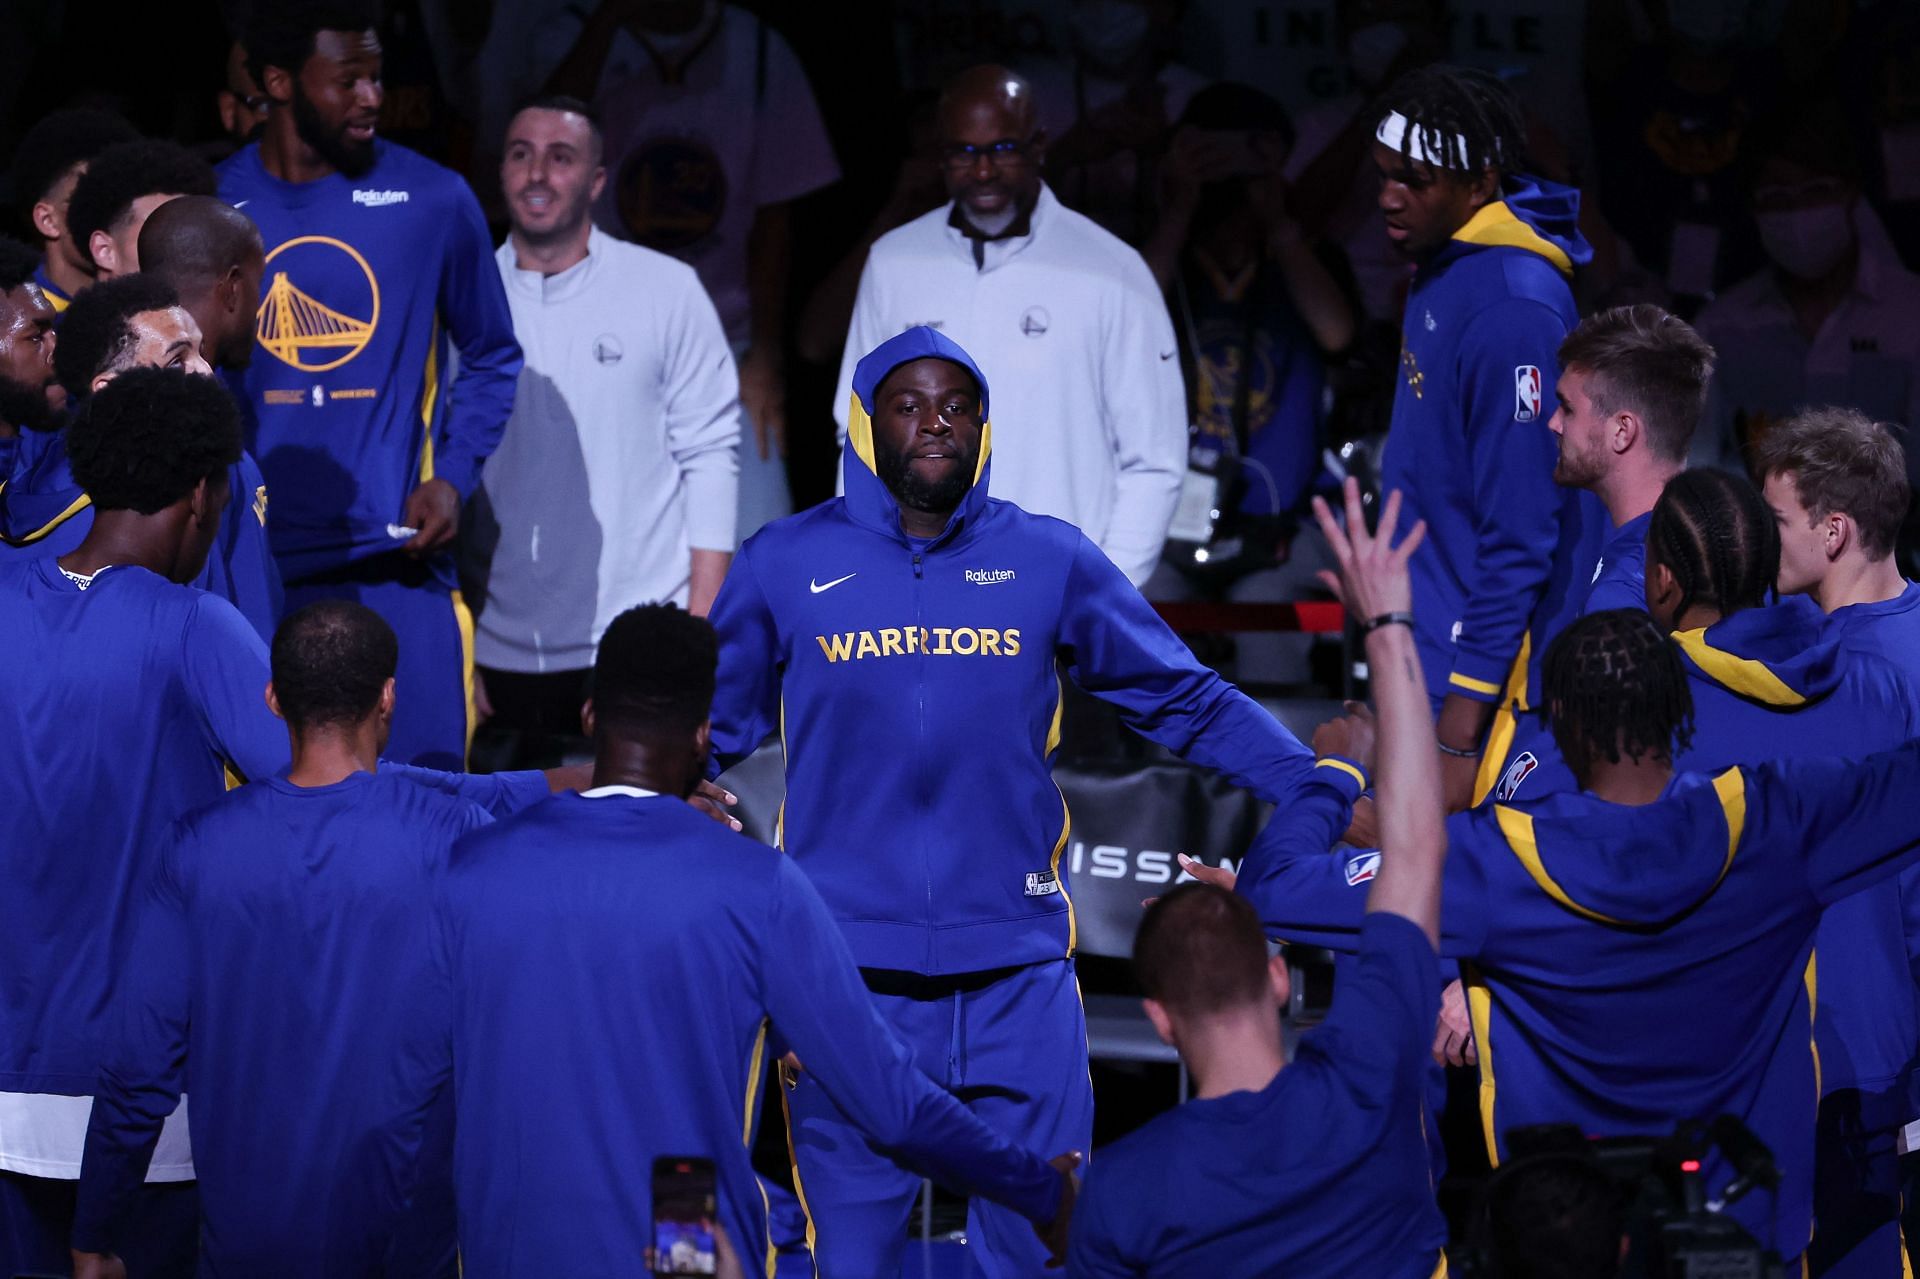 Draymond Green of the Golden State Warriors with his teammates